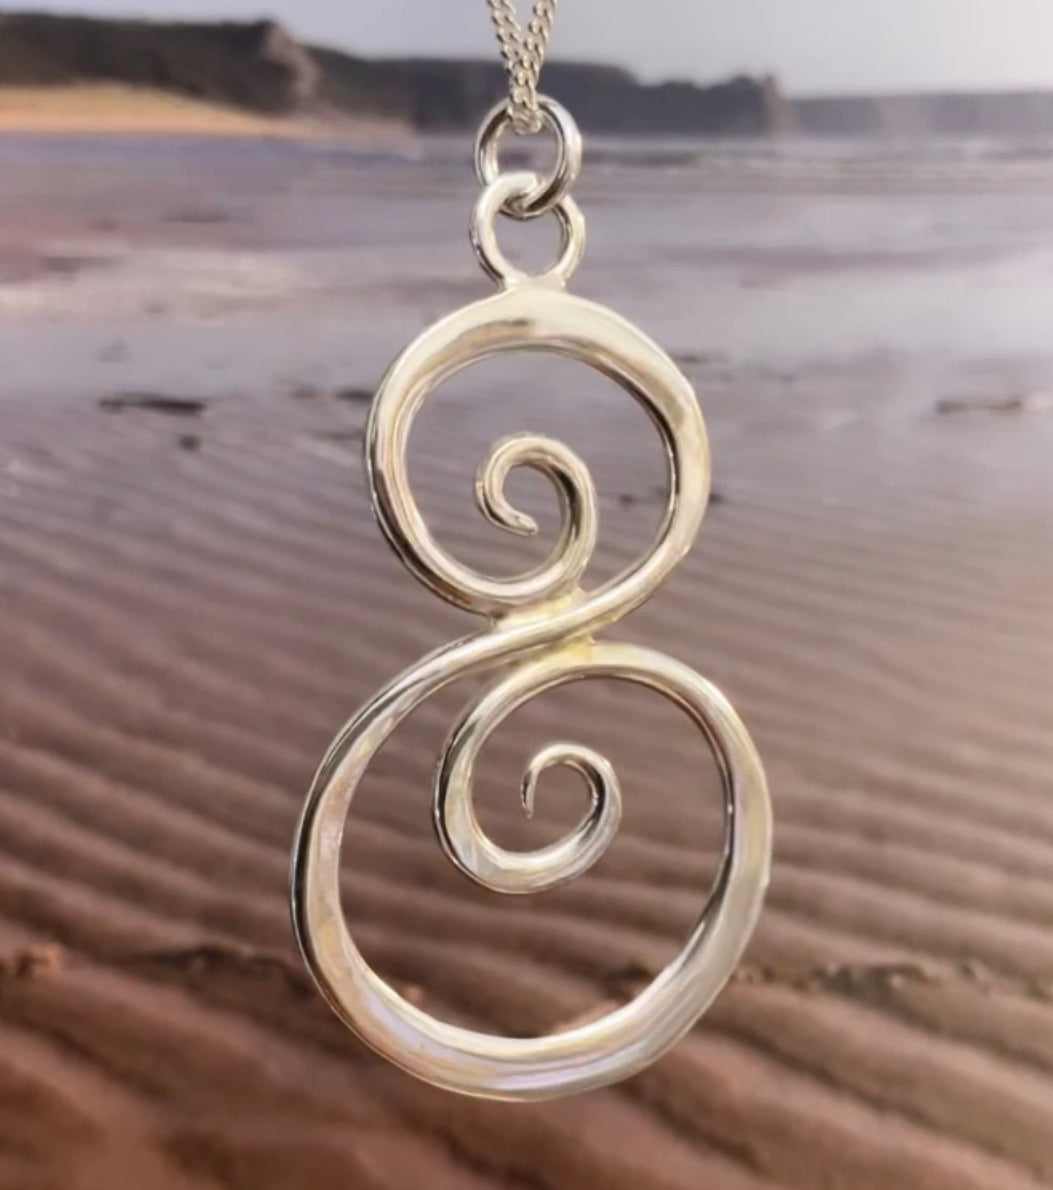 Swirly curly necklace